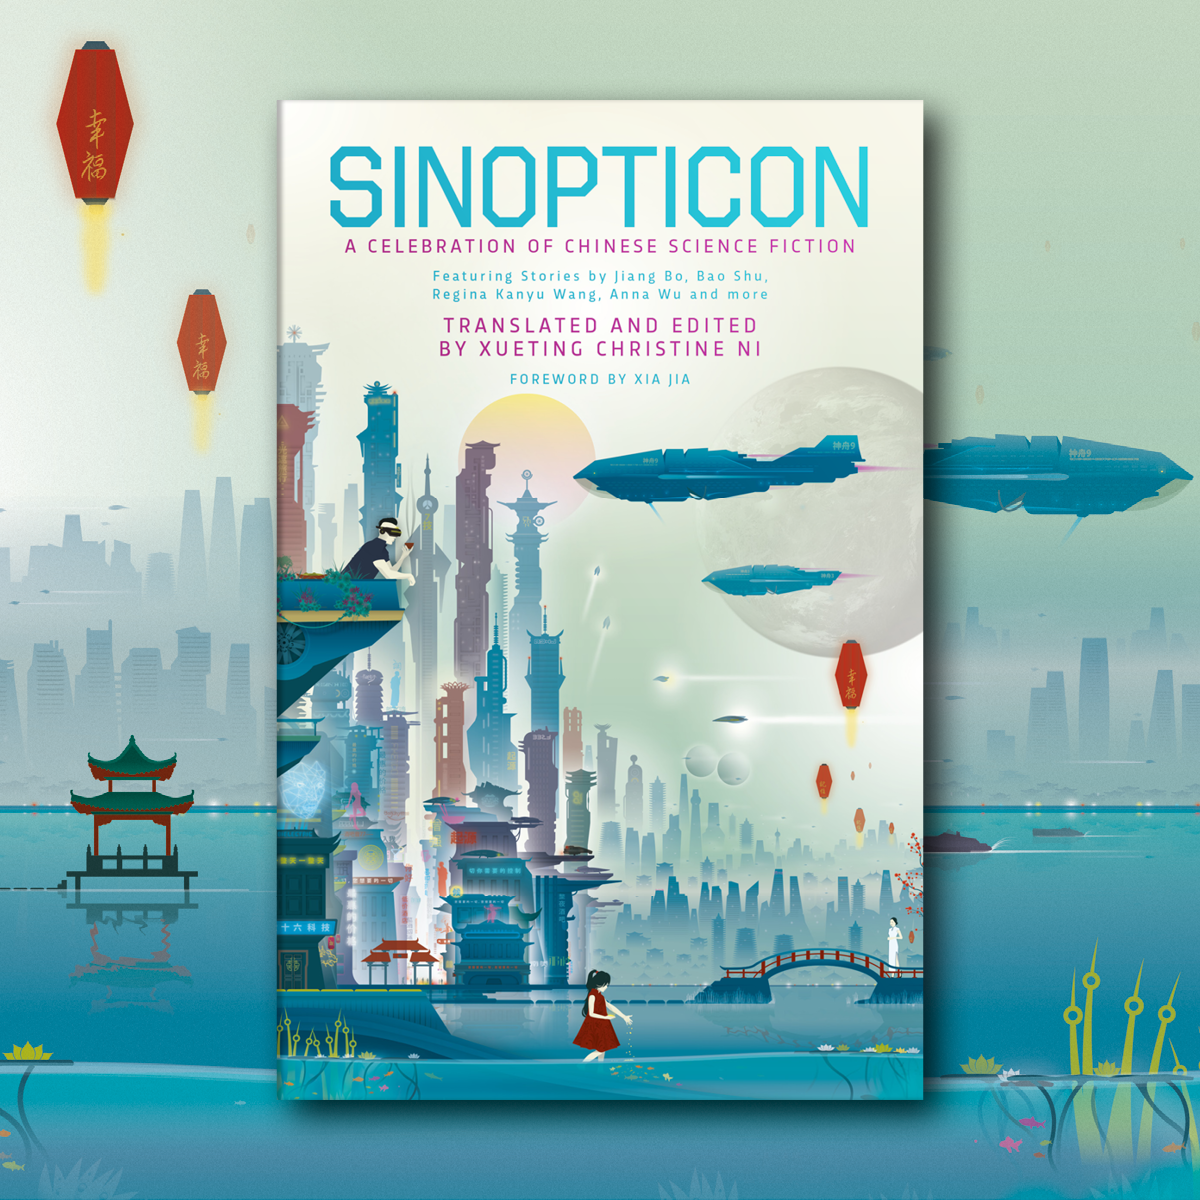 OUT NOW: Sinopticon: A Celebration of Chinese Science Fiction!